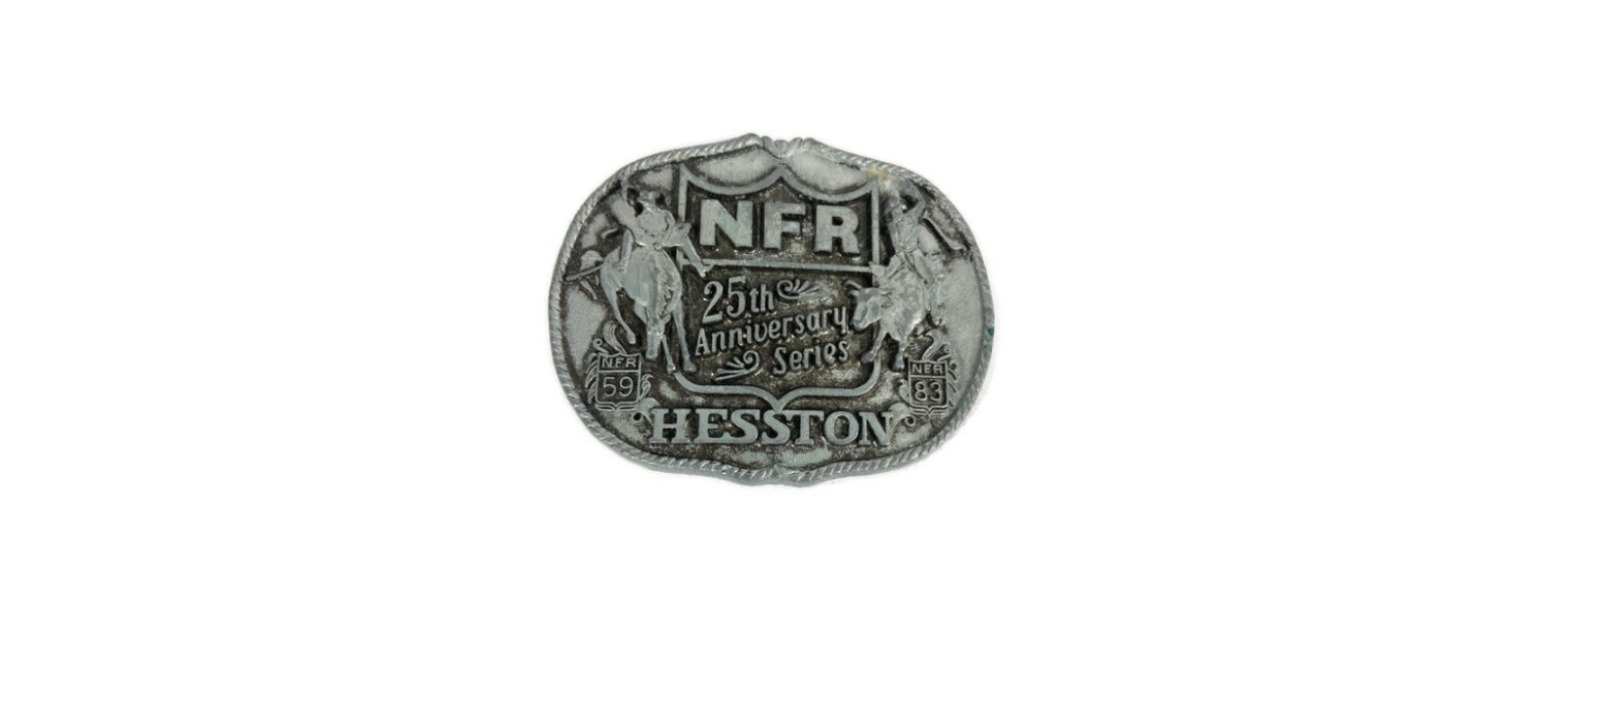 Hesston National Finals Rodeo 1983 25th Anniversary Belt Buckle Rodes NFR